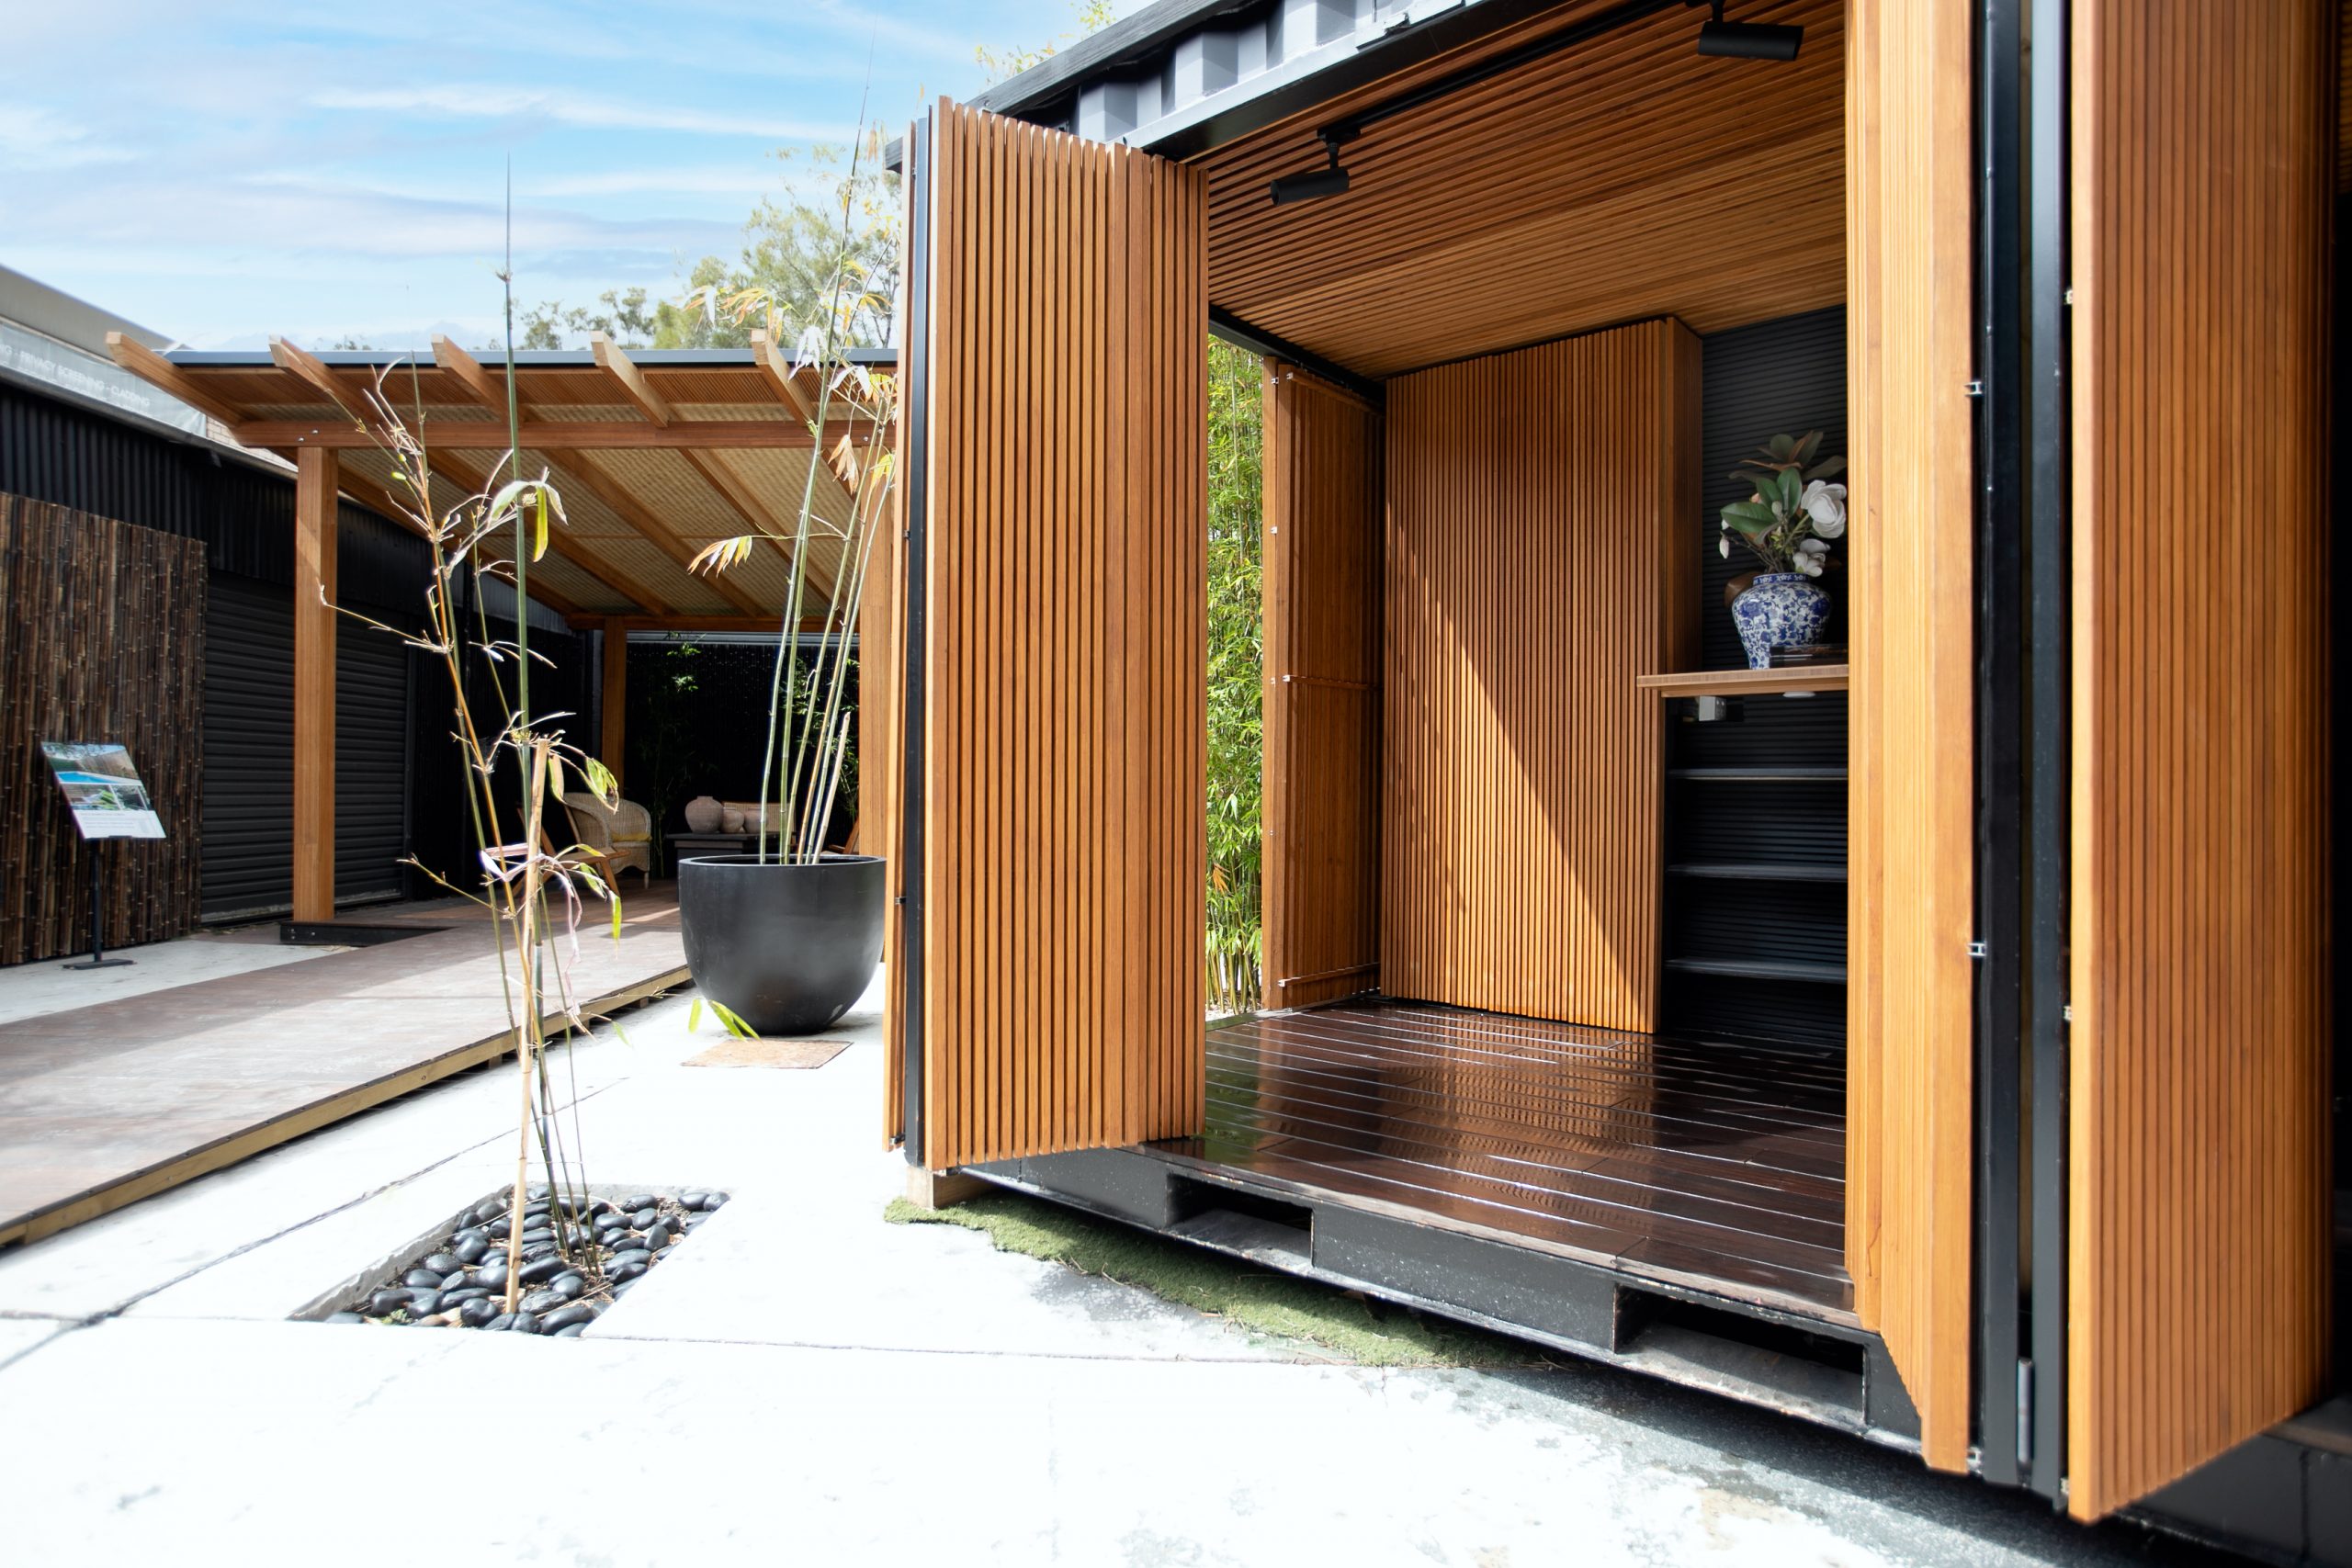 Container Clad in Contemporary Laminated Bamboo Cladding